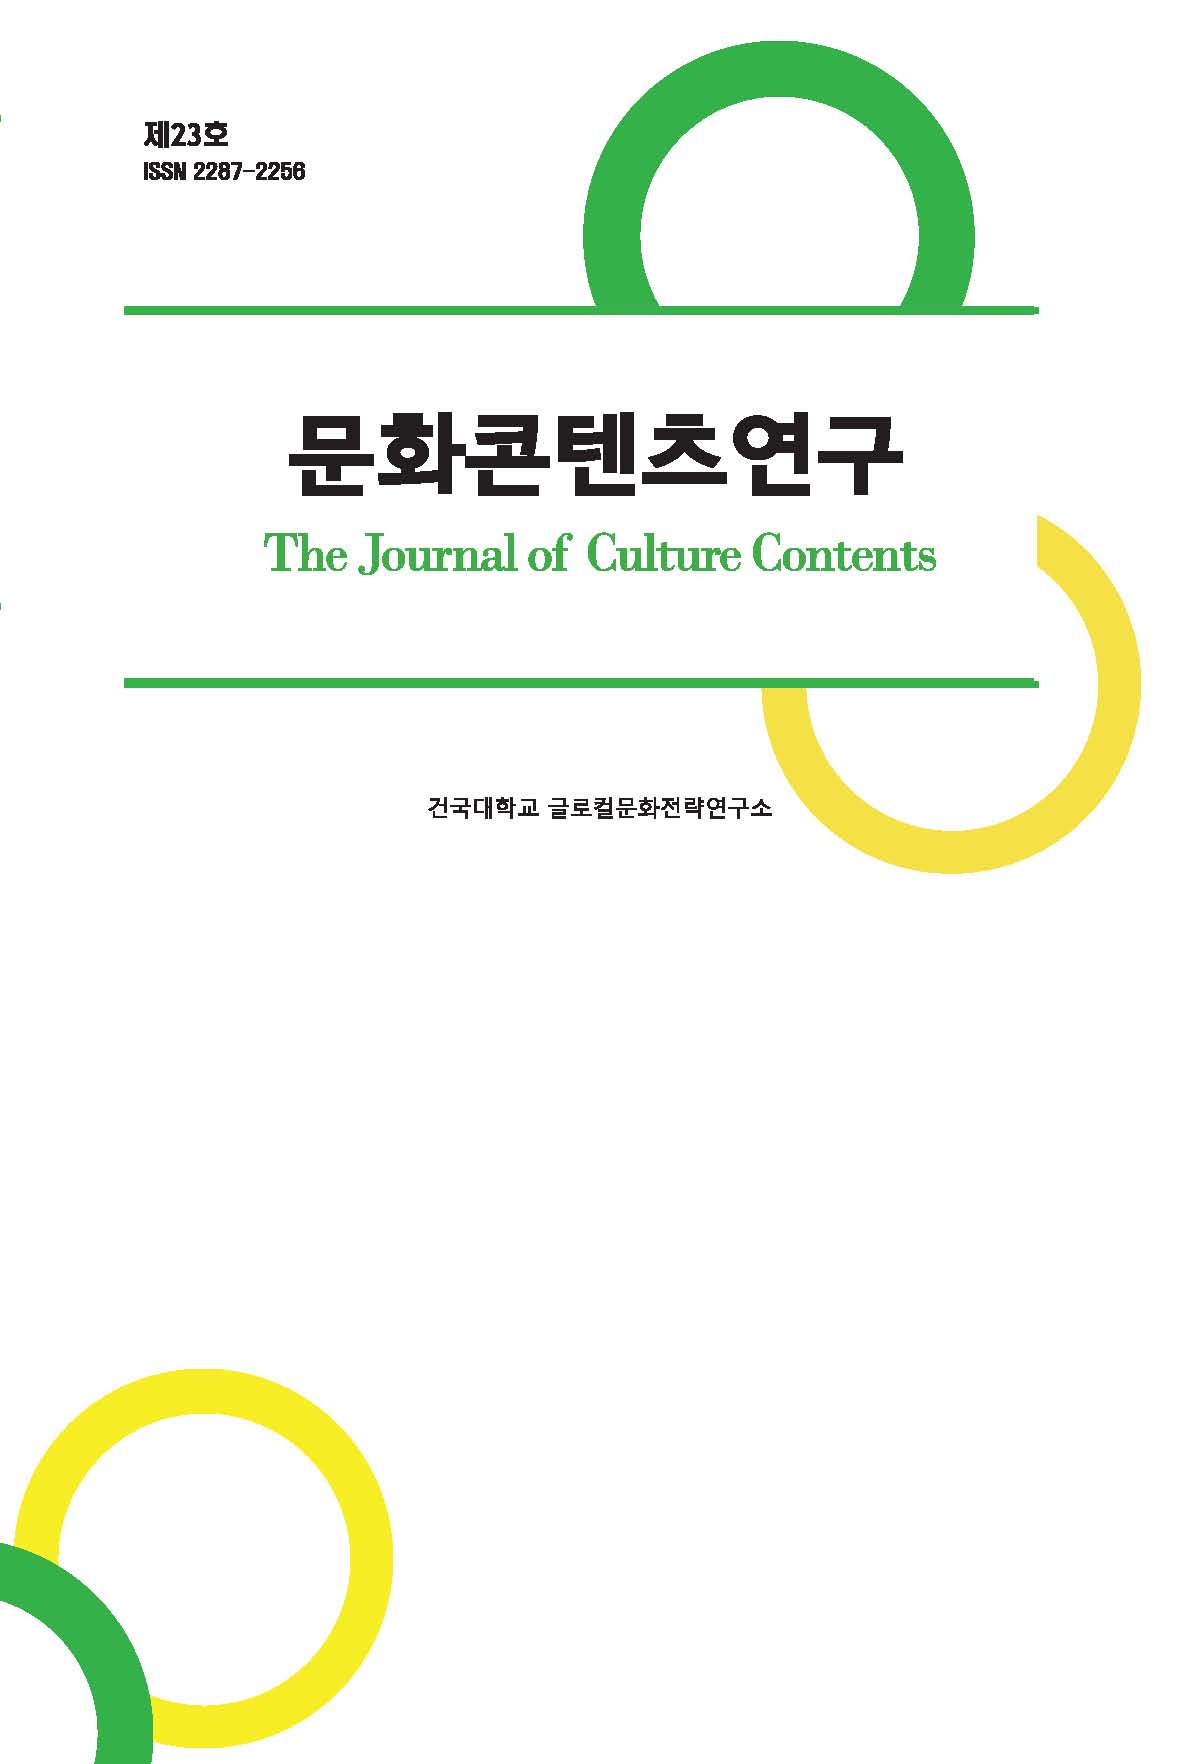 The Journal of Culture Contents